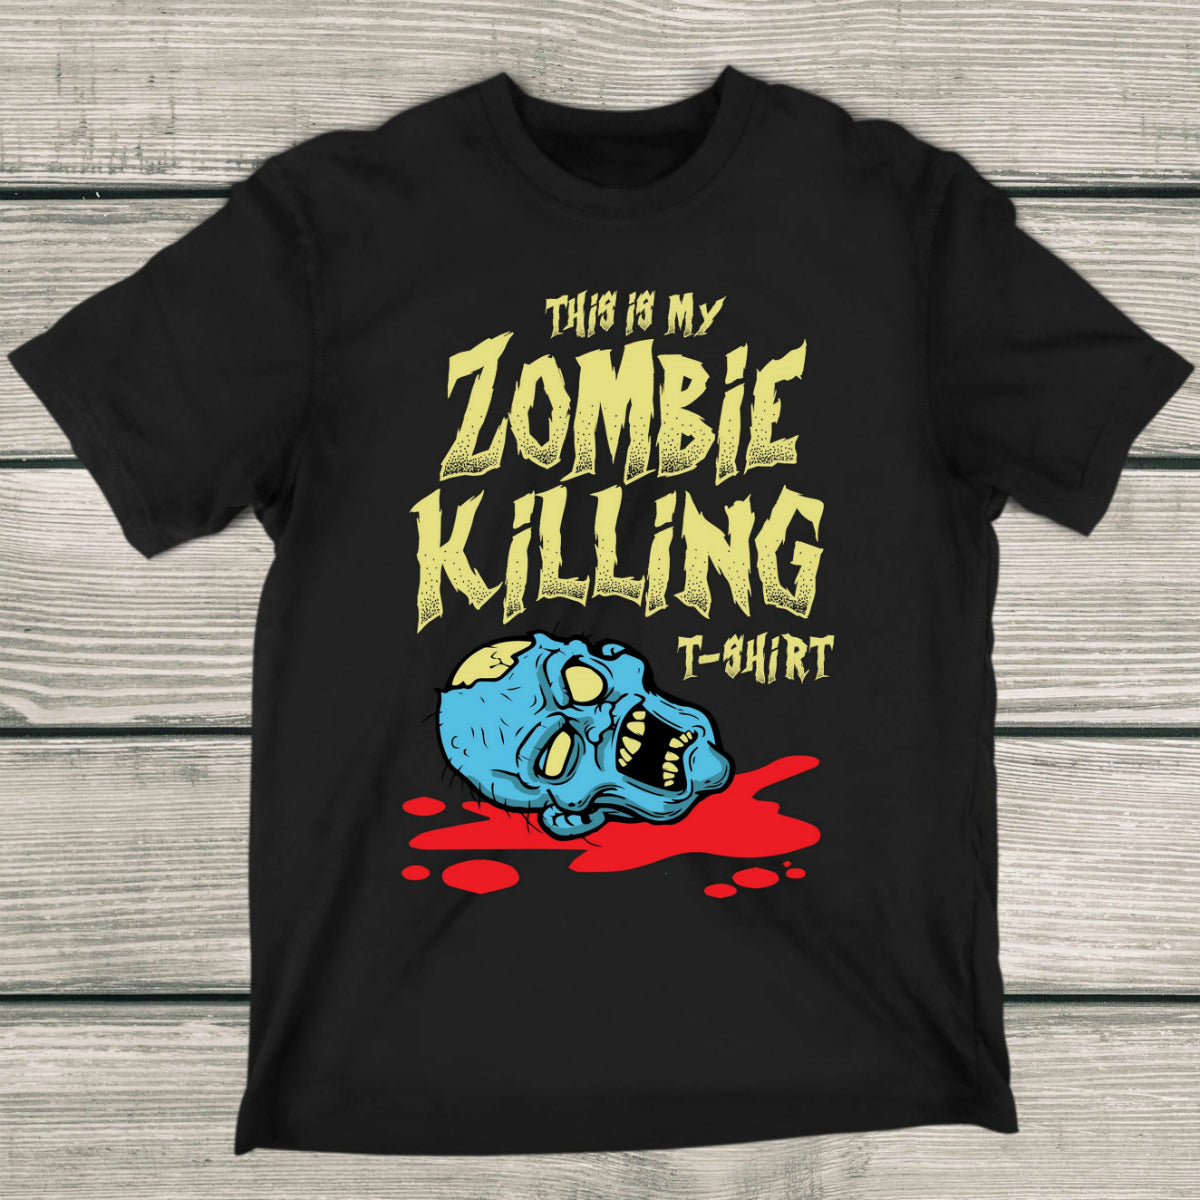 This Is My Zombie Killing T-Shirt - Video Gaming Shirt